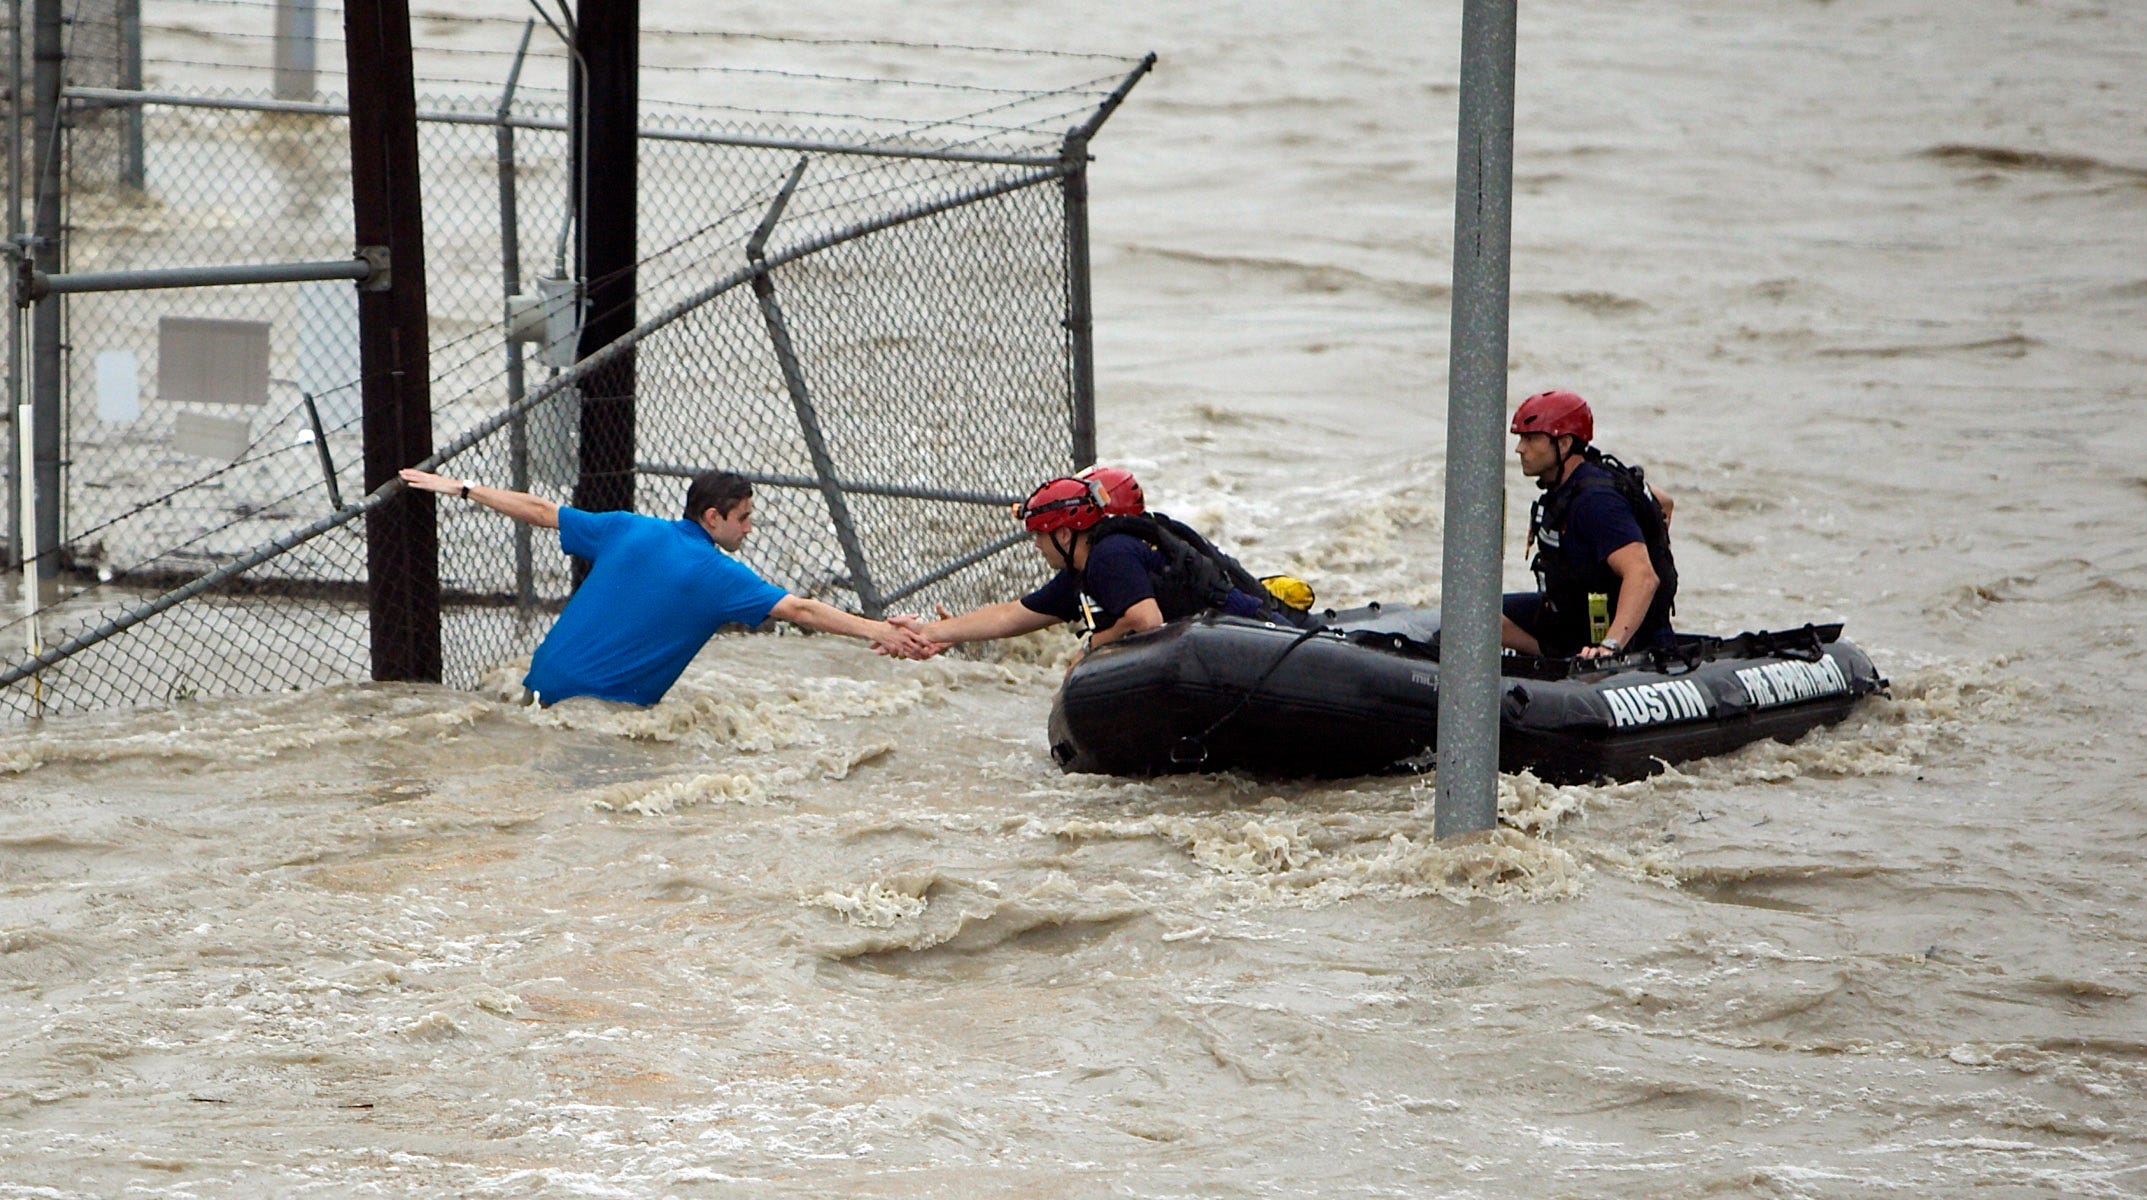 At least 2 dead after flooding leaves Houston under water